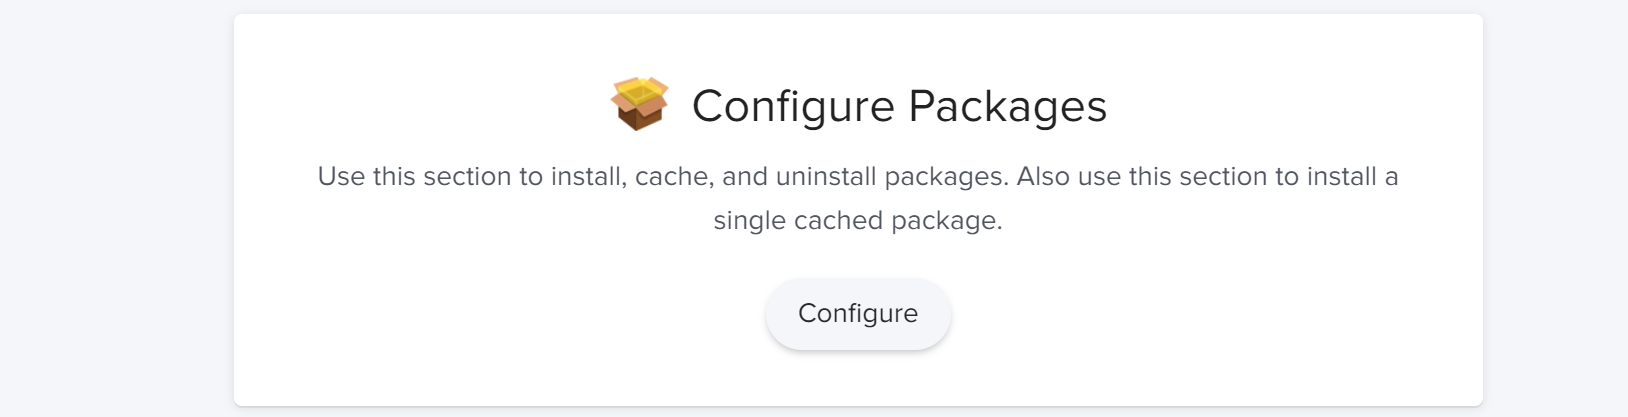 Conifgure the install package.